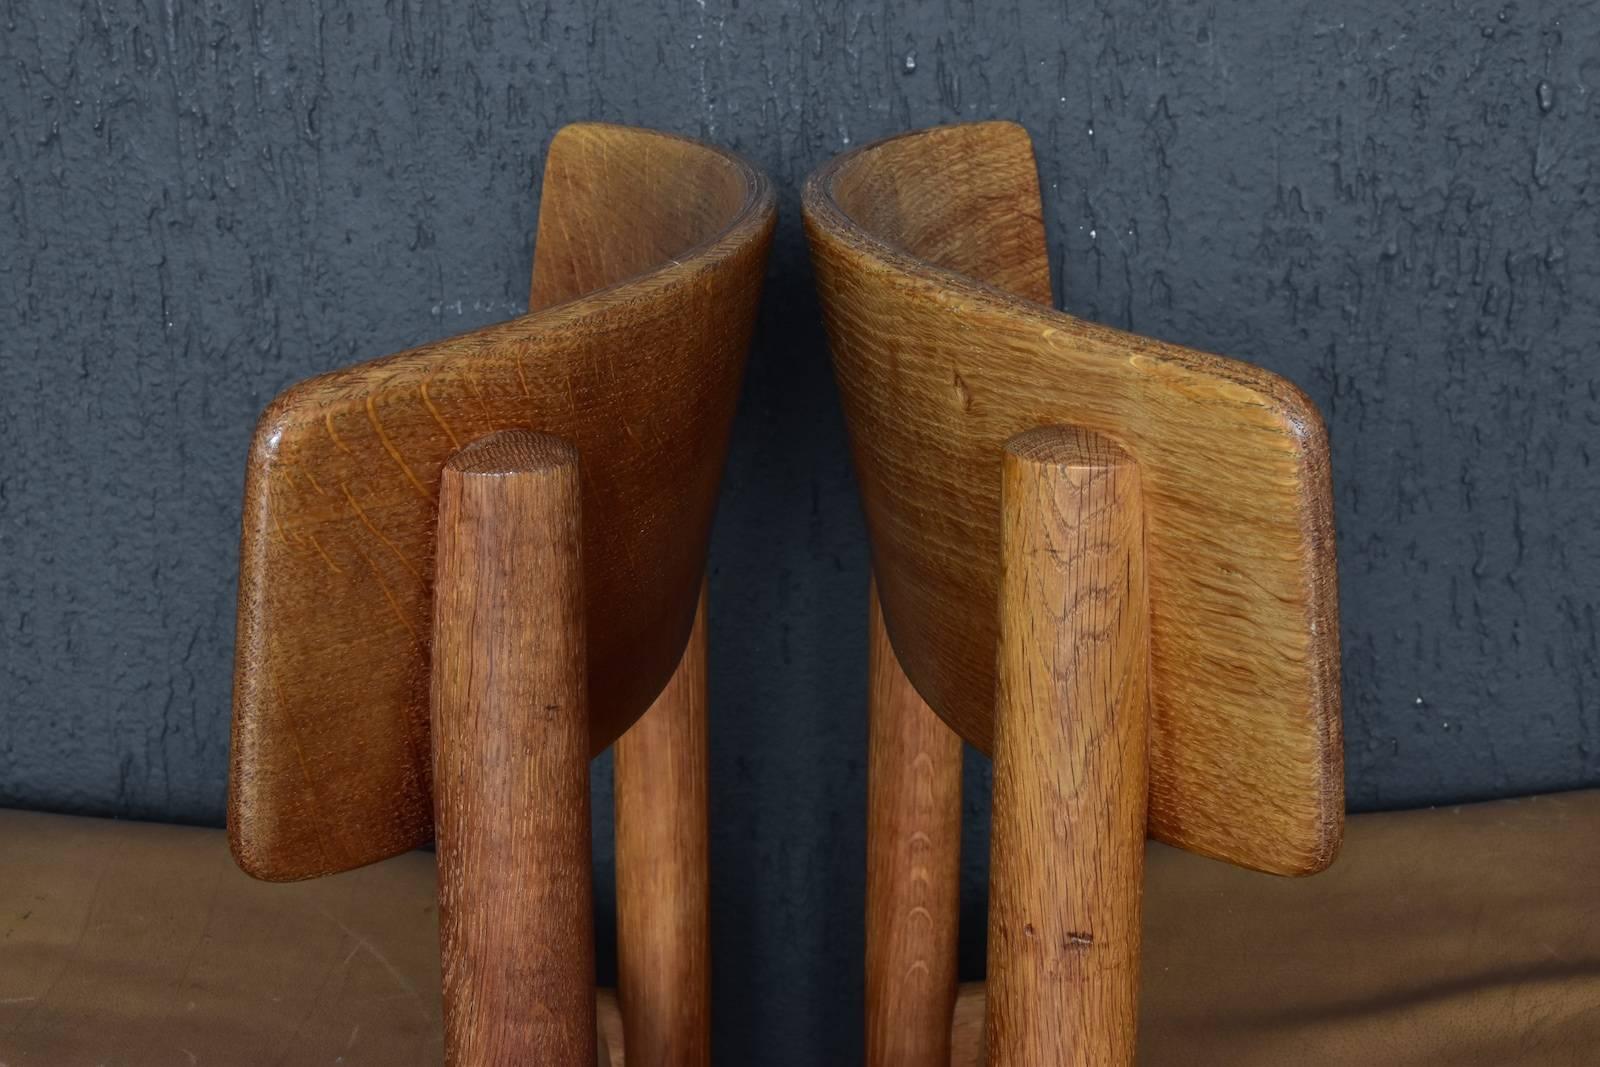 Set of four Børge Mogensen dining chairs in oak and light brown leather by Fredericia Stolefabrik, Denmark, 1950s.